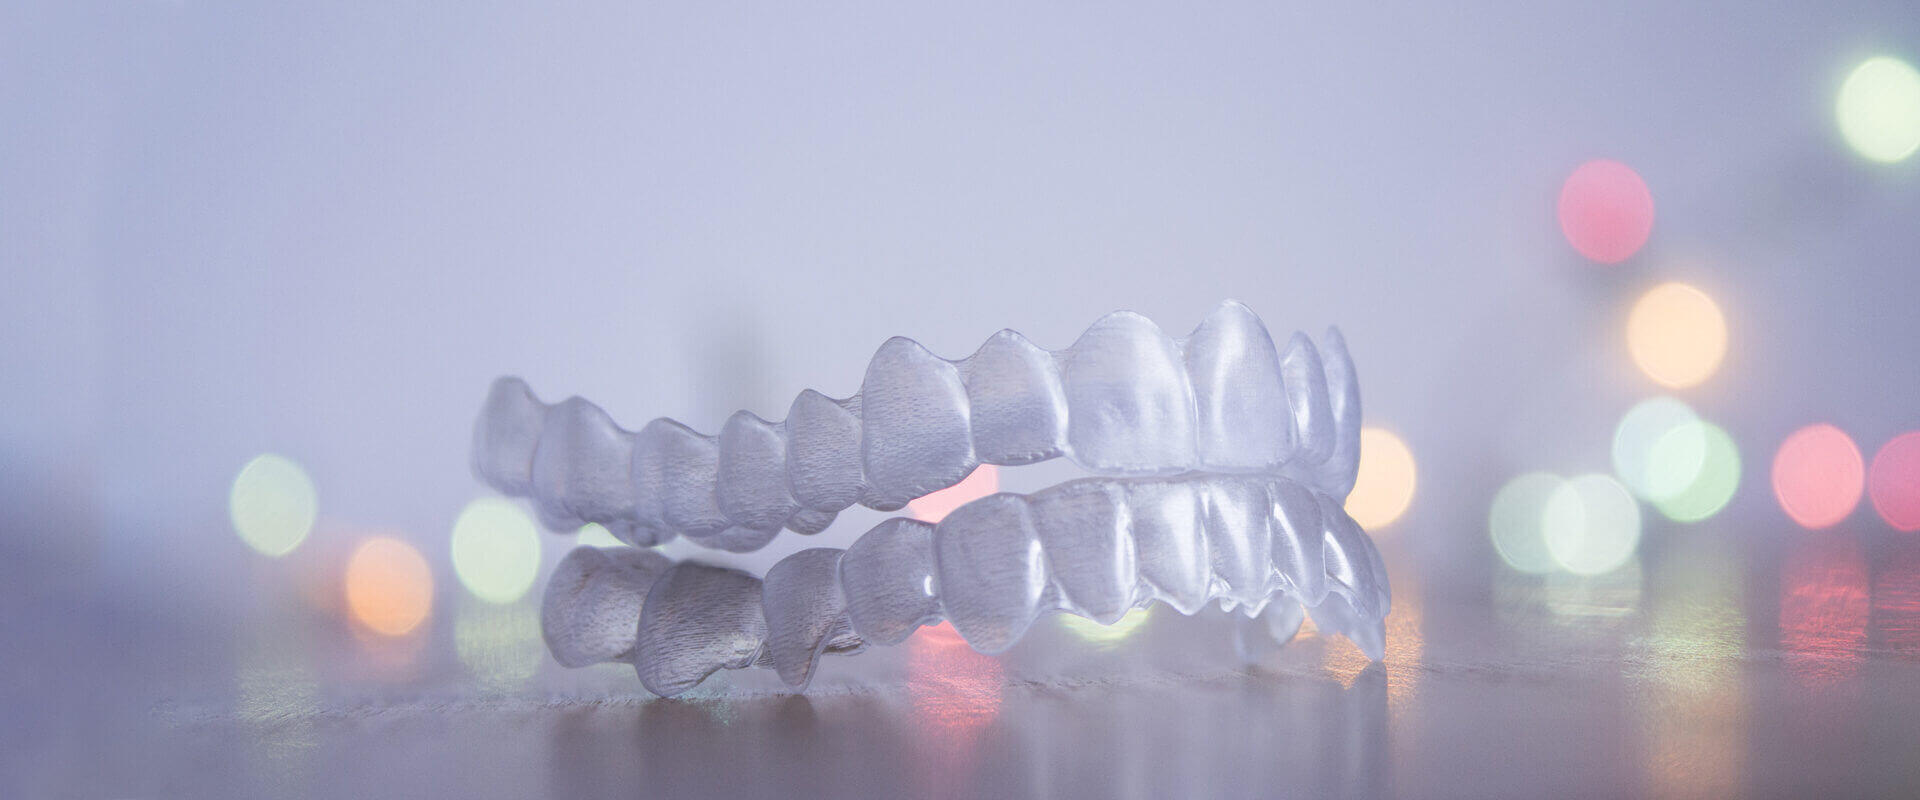 Complimentary Invisalign Scan